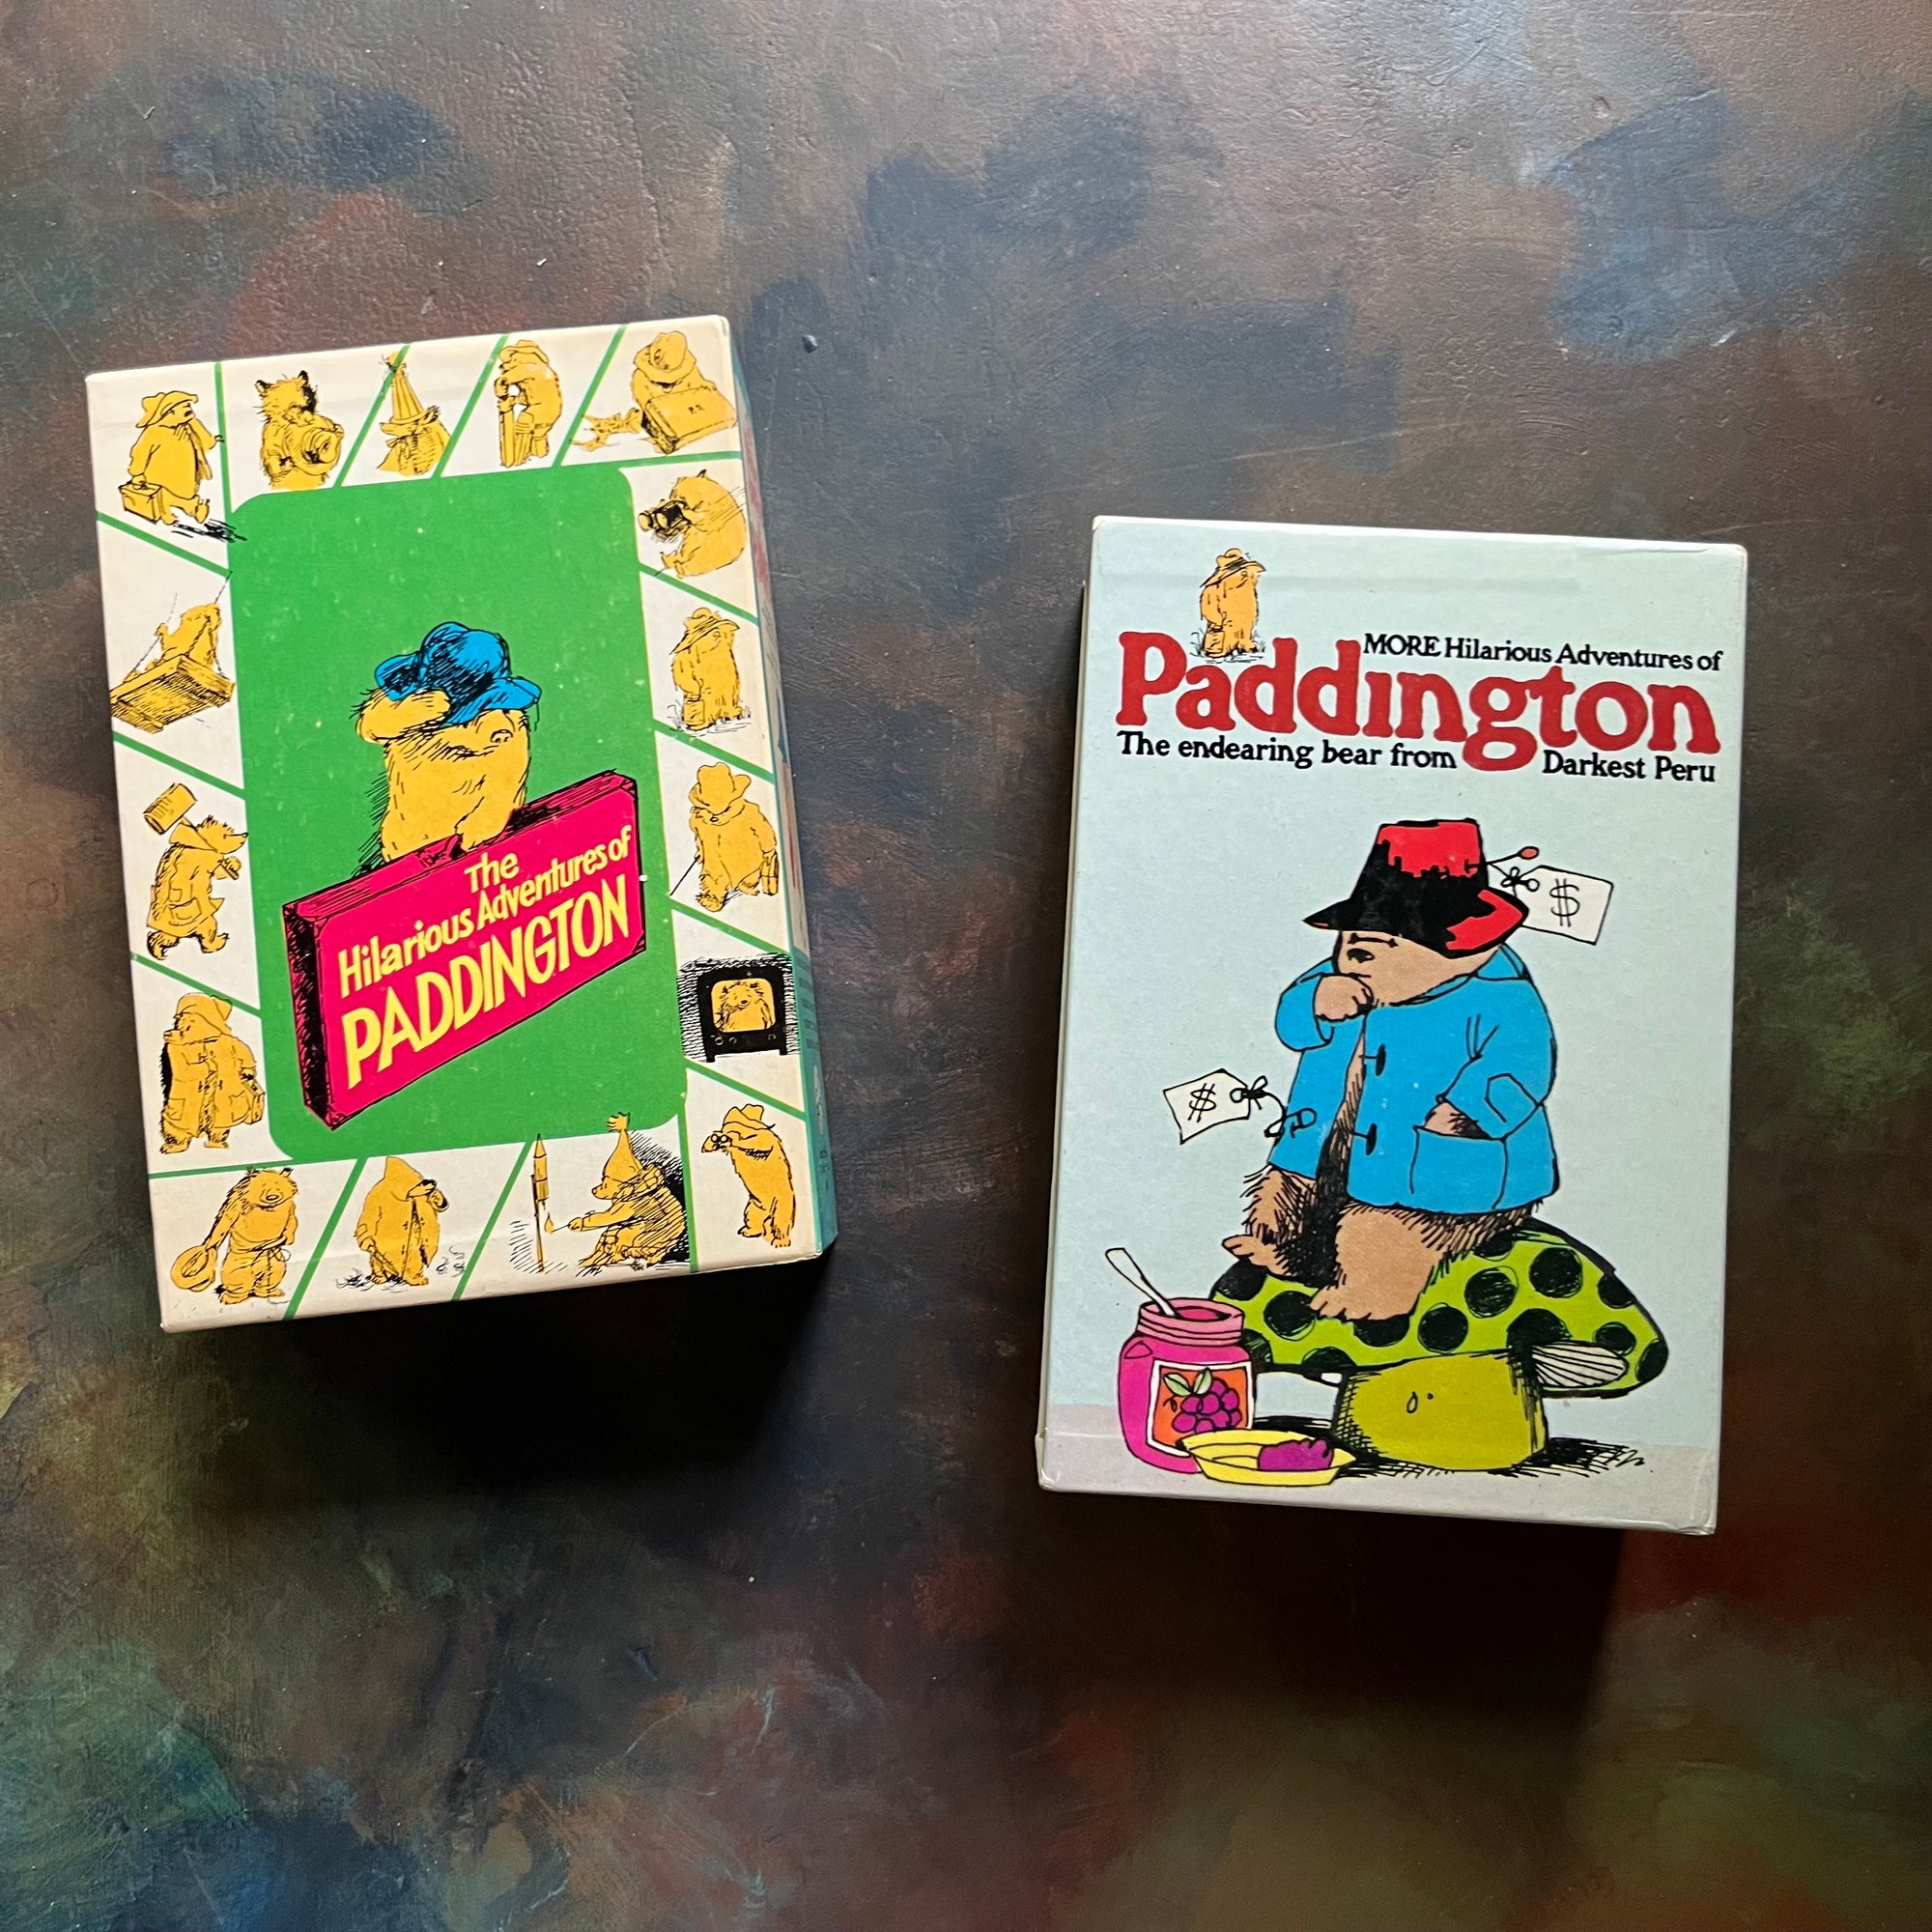 The Hilarious Adventures of Paddington the Bear & More Hilarious Adventures of Paddington Book Sets written by Michael Bond-vintage children's books-view of the side of the box sleeves for each set